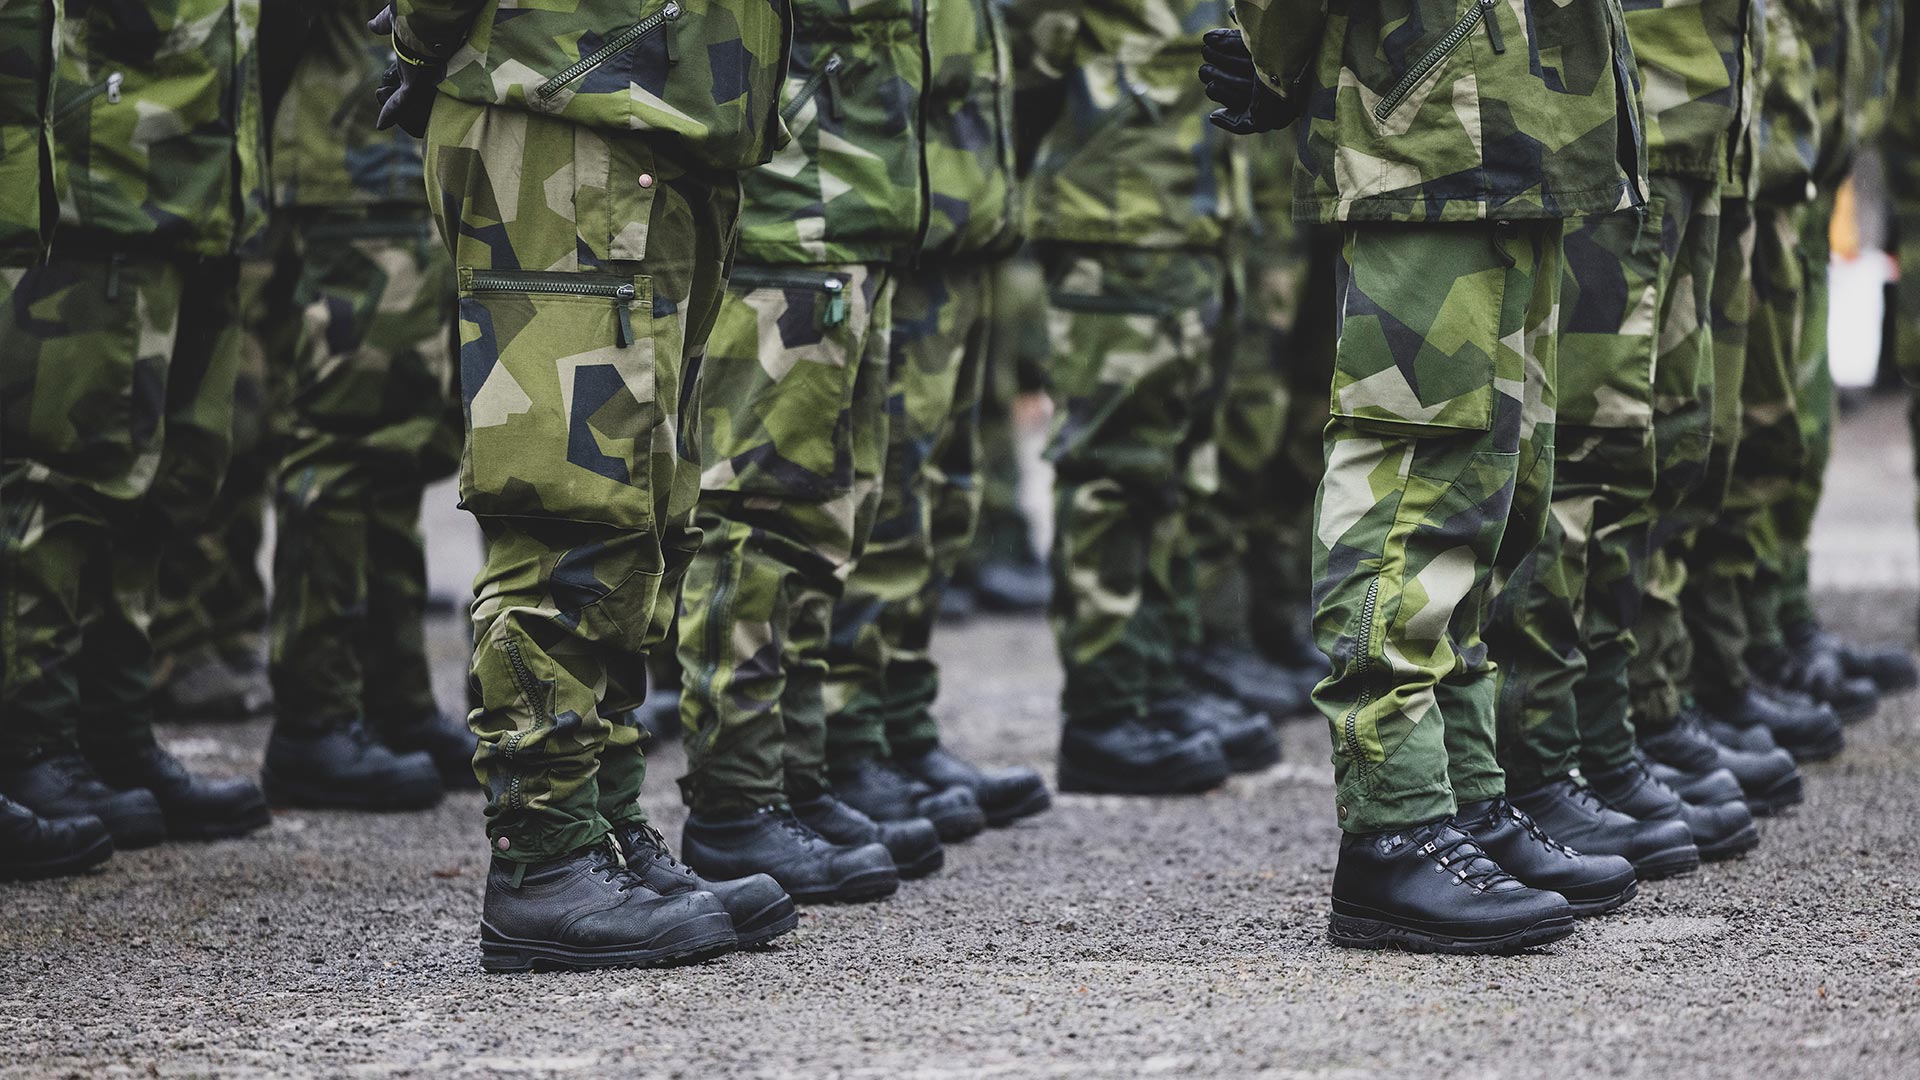 Legs of Swedish soldiers in green camouflage uniform